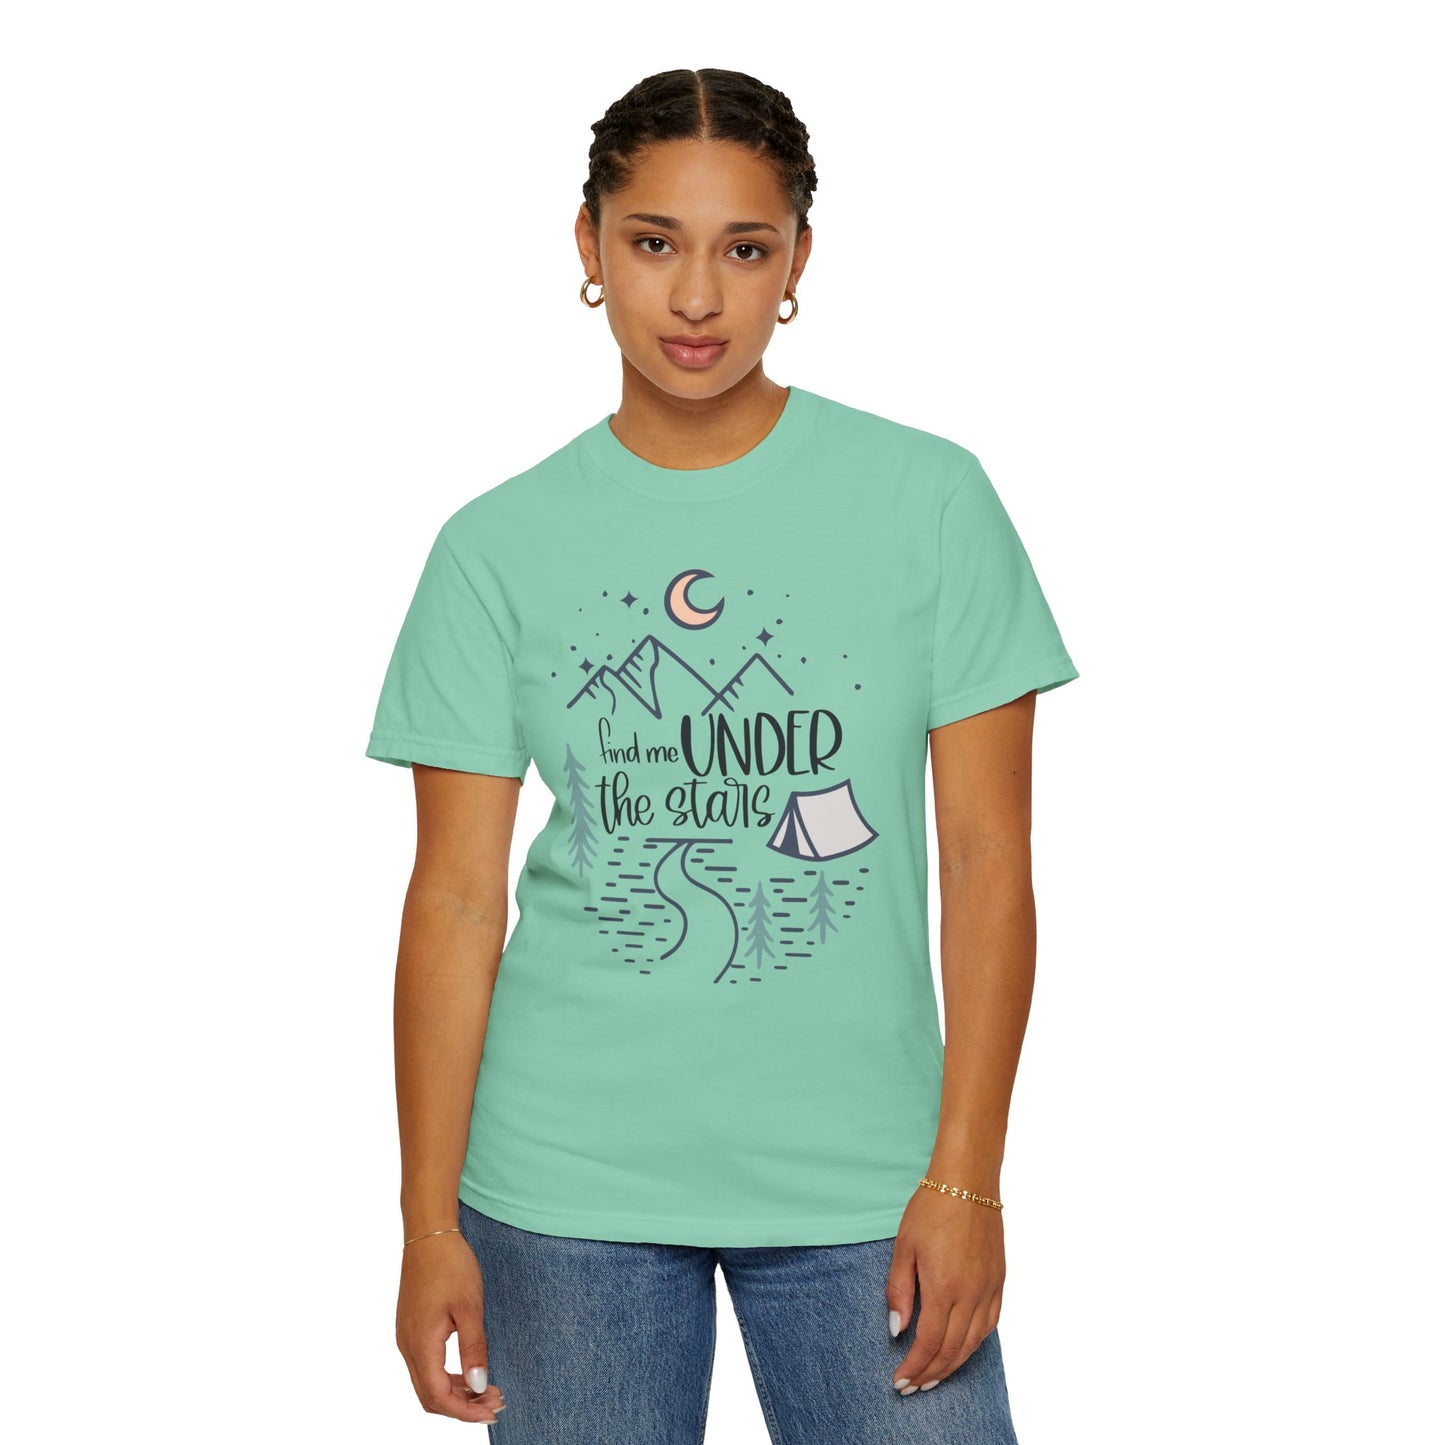 Comfort Colors 'Find Me Under the Stars' Unisex Garment-Dyed T-shirt